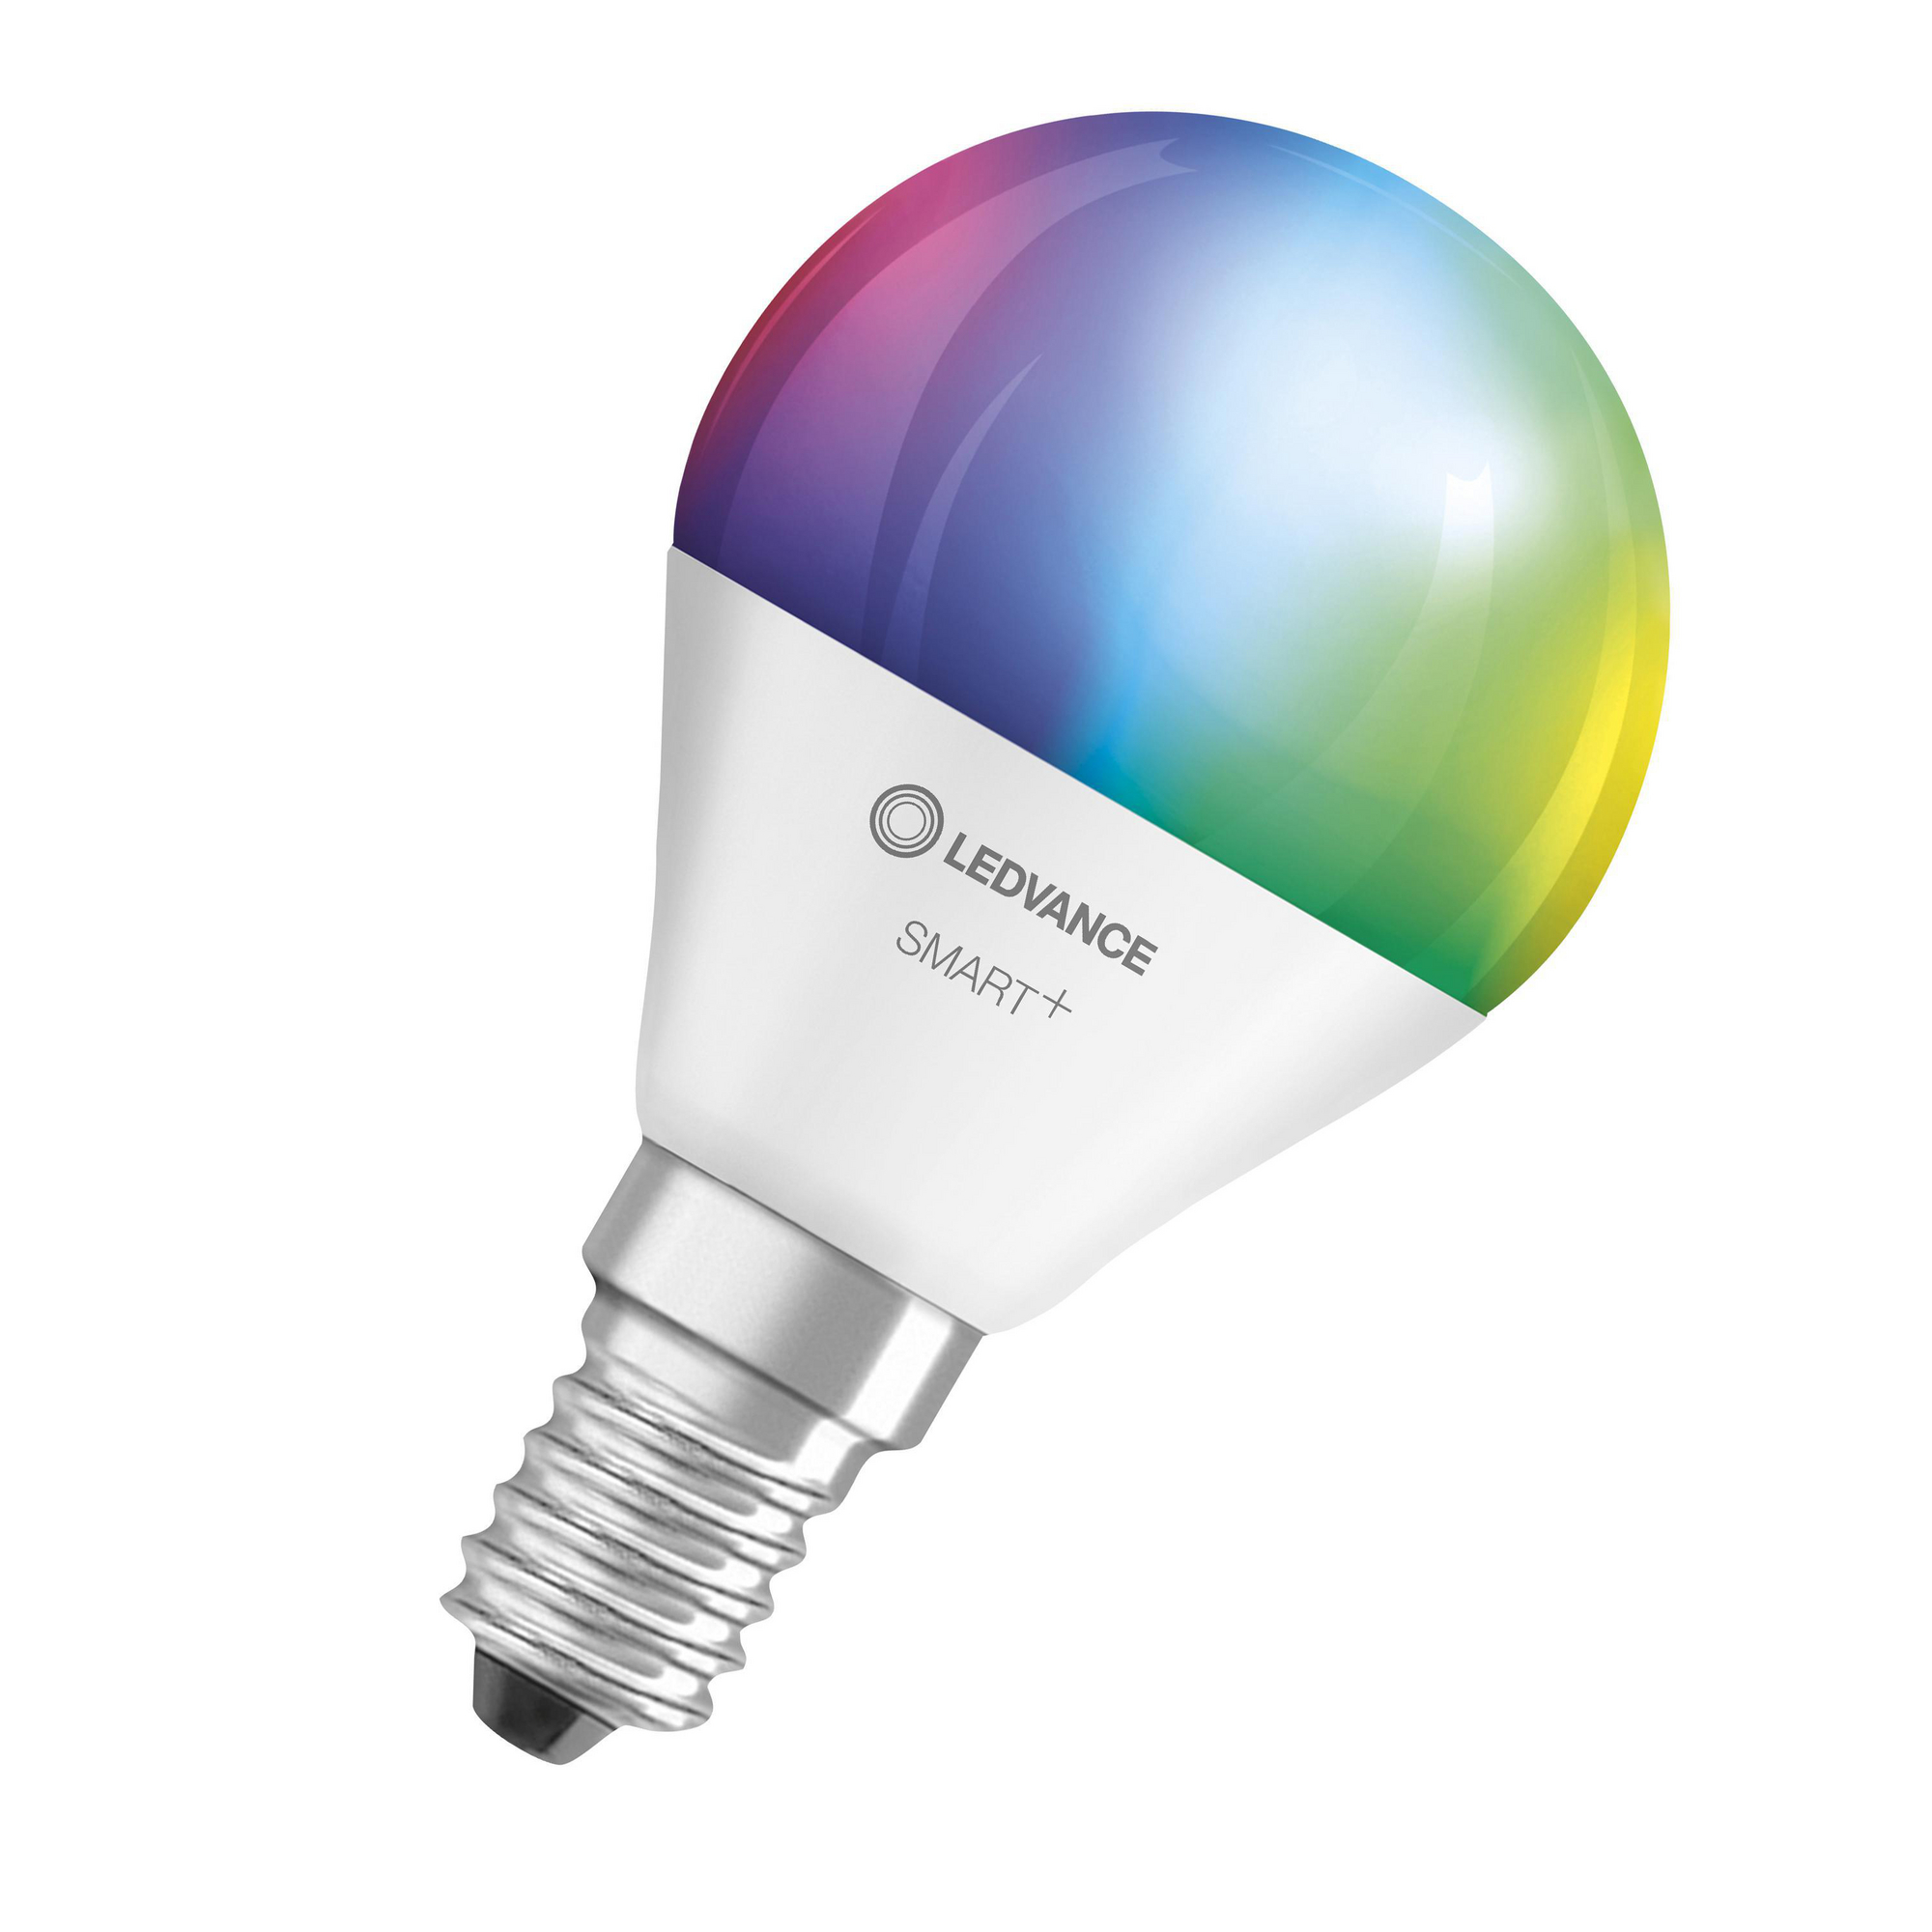 LED-RGB-Lampe 'Smart+' 8,9 cm 470 lm 5 W E14 weiß WLAN + product picture